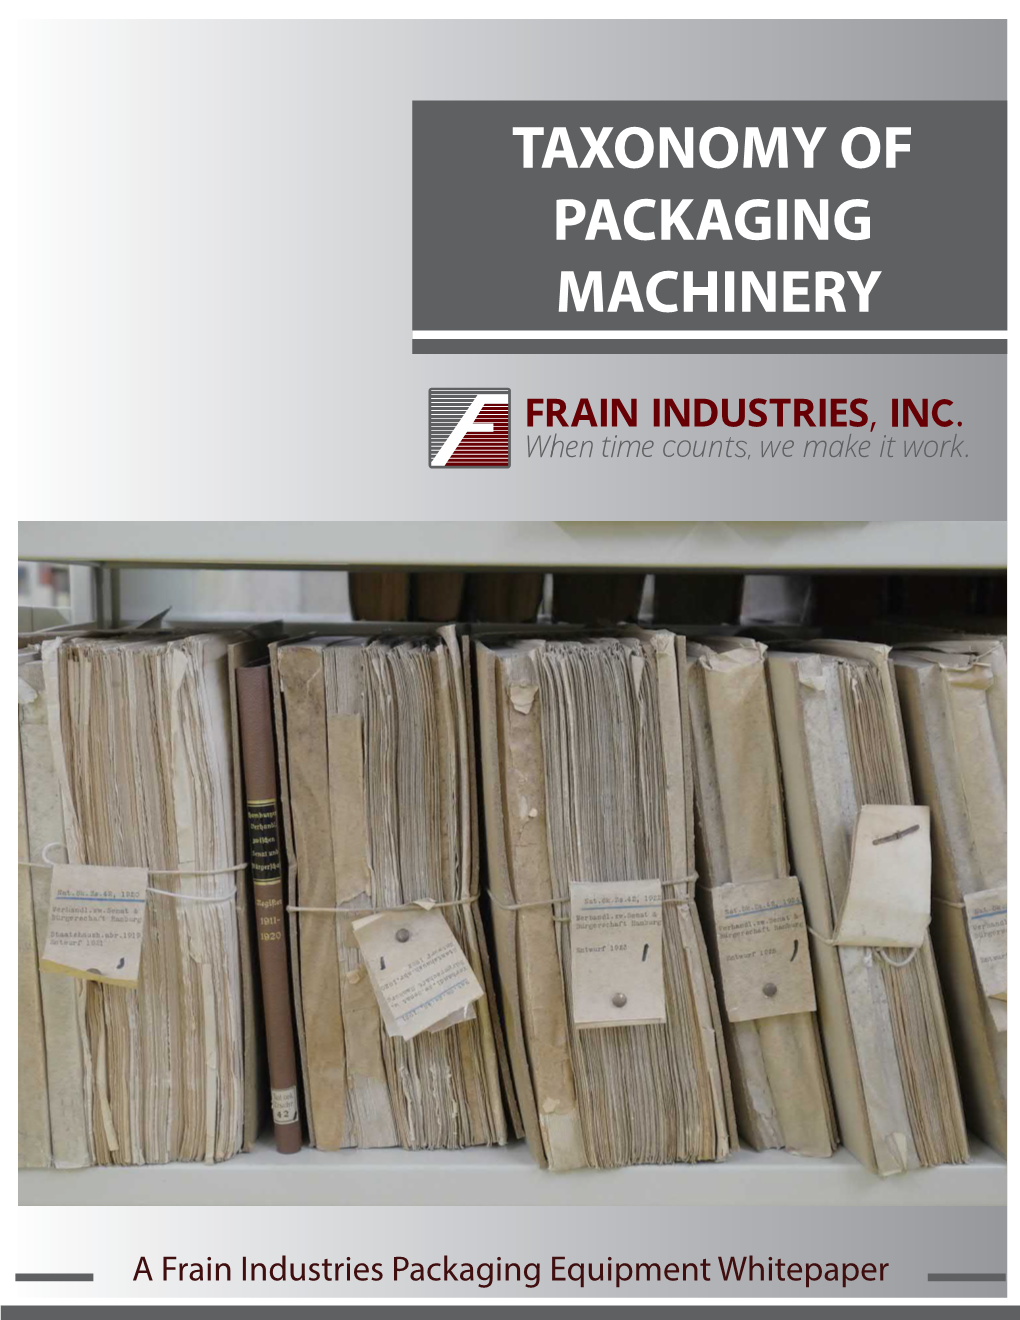 Taxonomy of Packaging Machinery